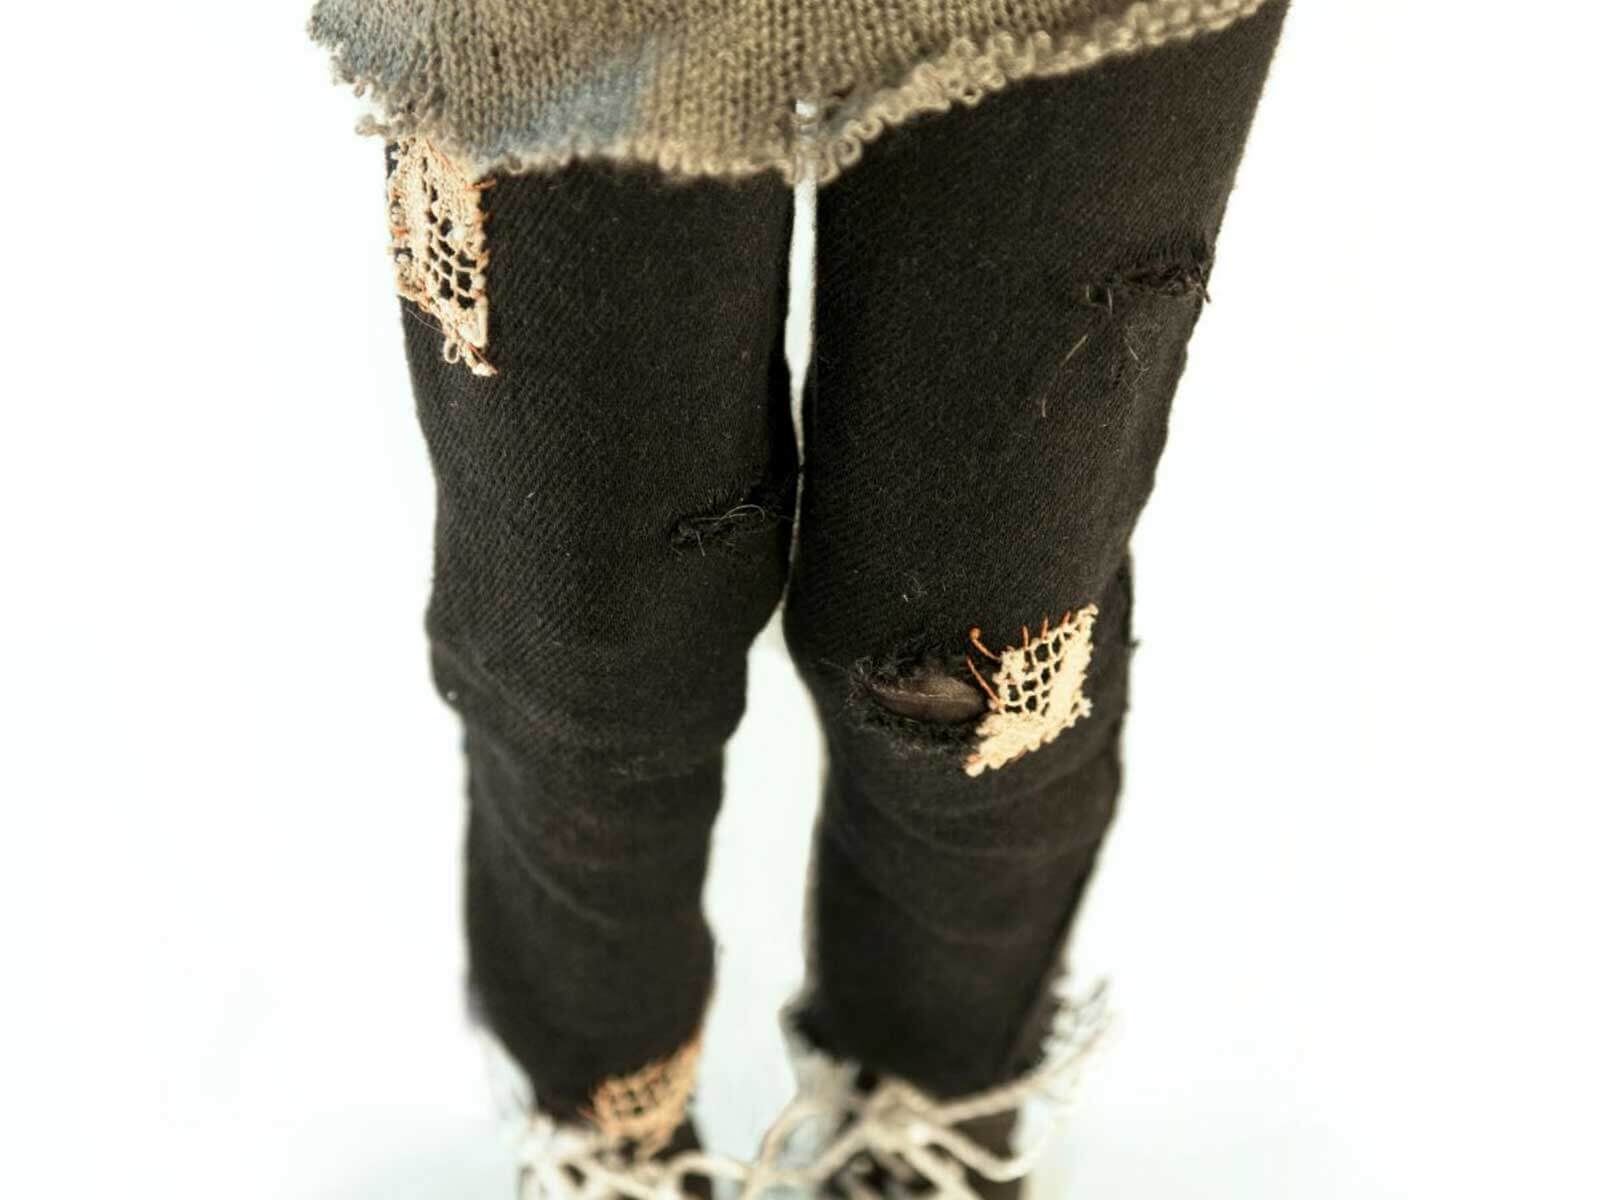 A waist-down shot of a doll’s legs wearing patched up pants.